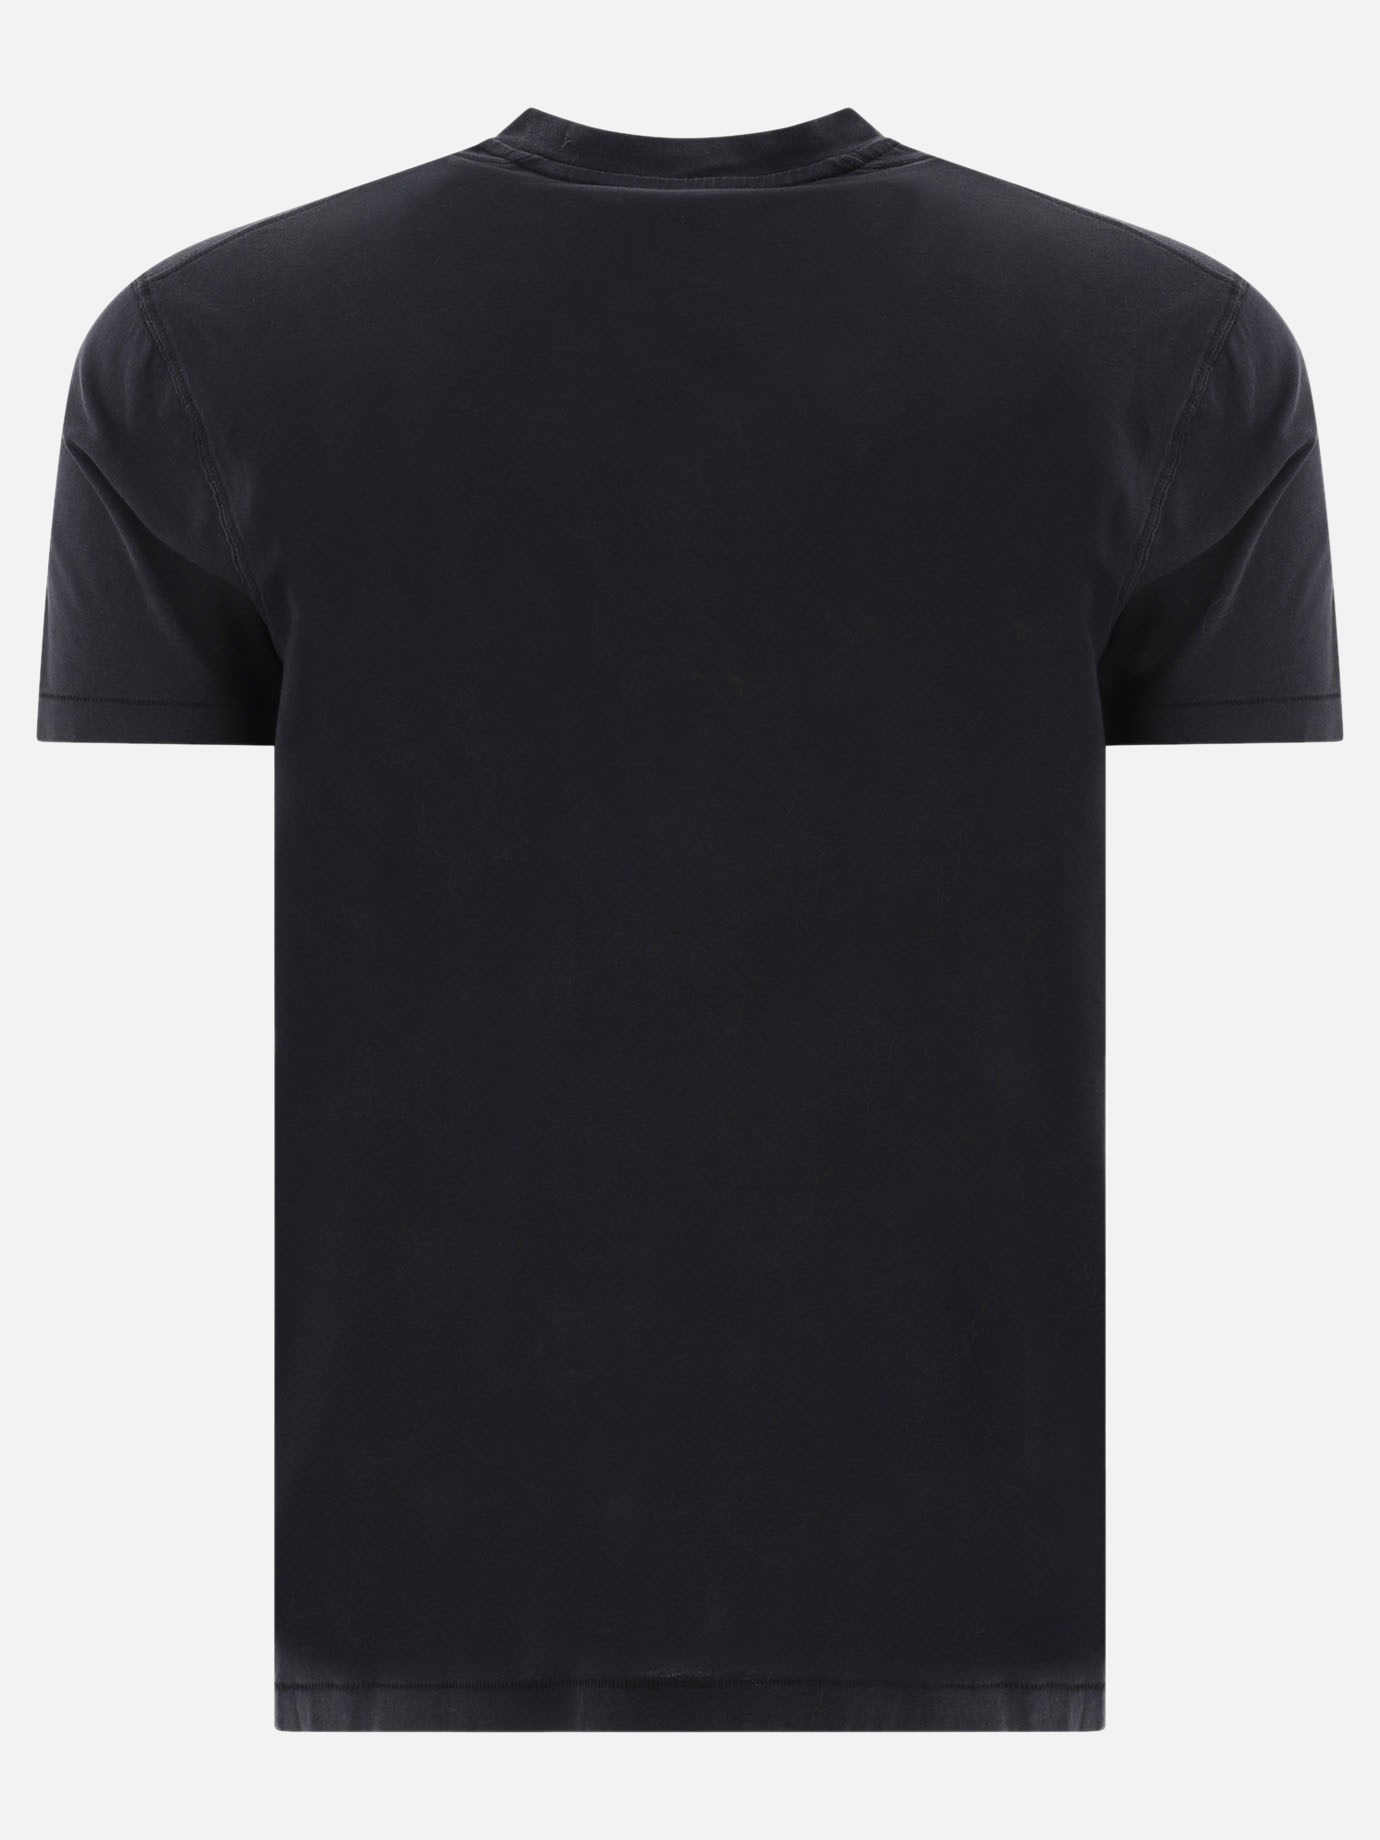  TF  t-shirt by Tom Ford